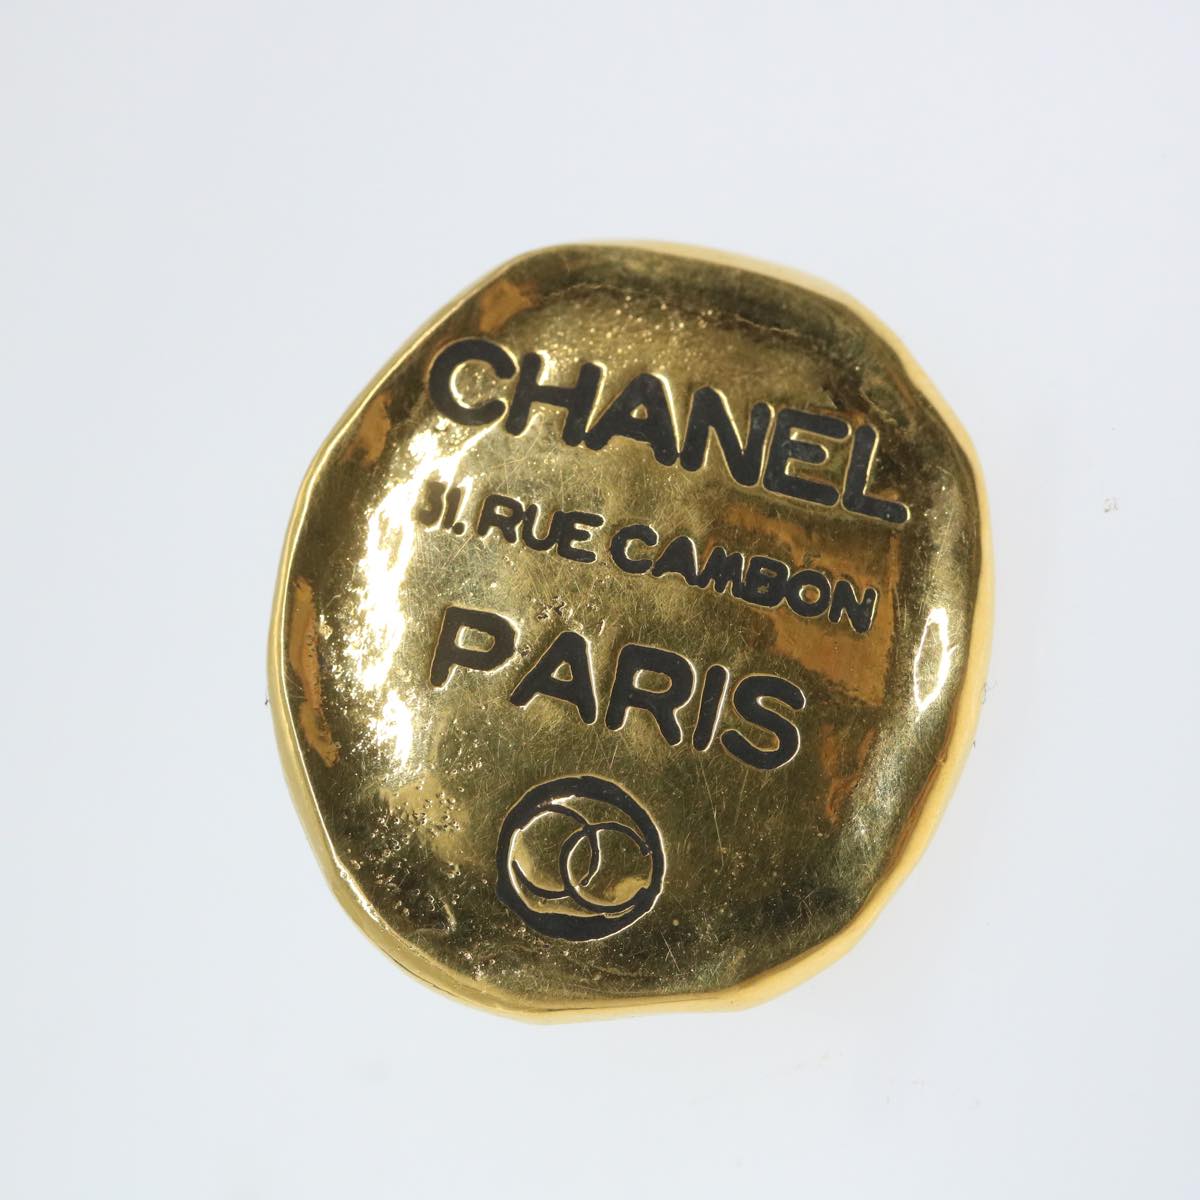 CHANEL Cambon Earring Metal Gold Tone CC Auth bs9649